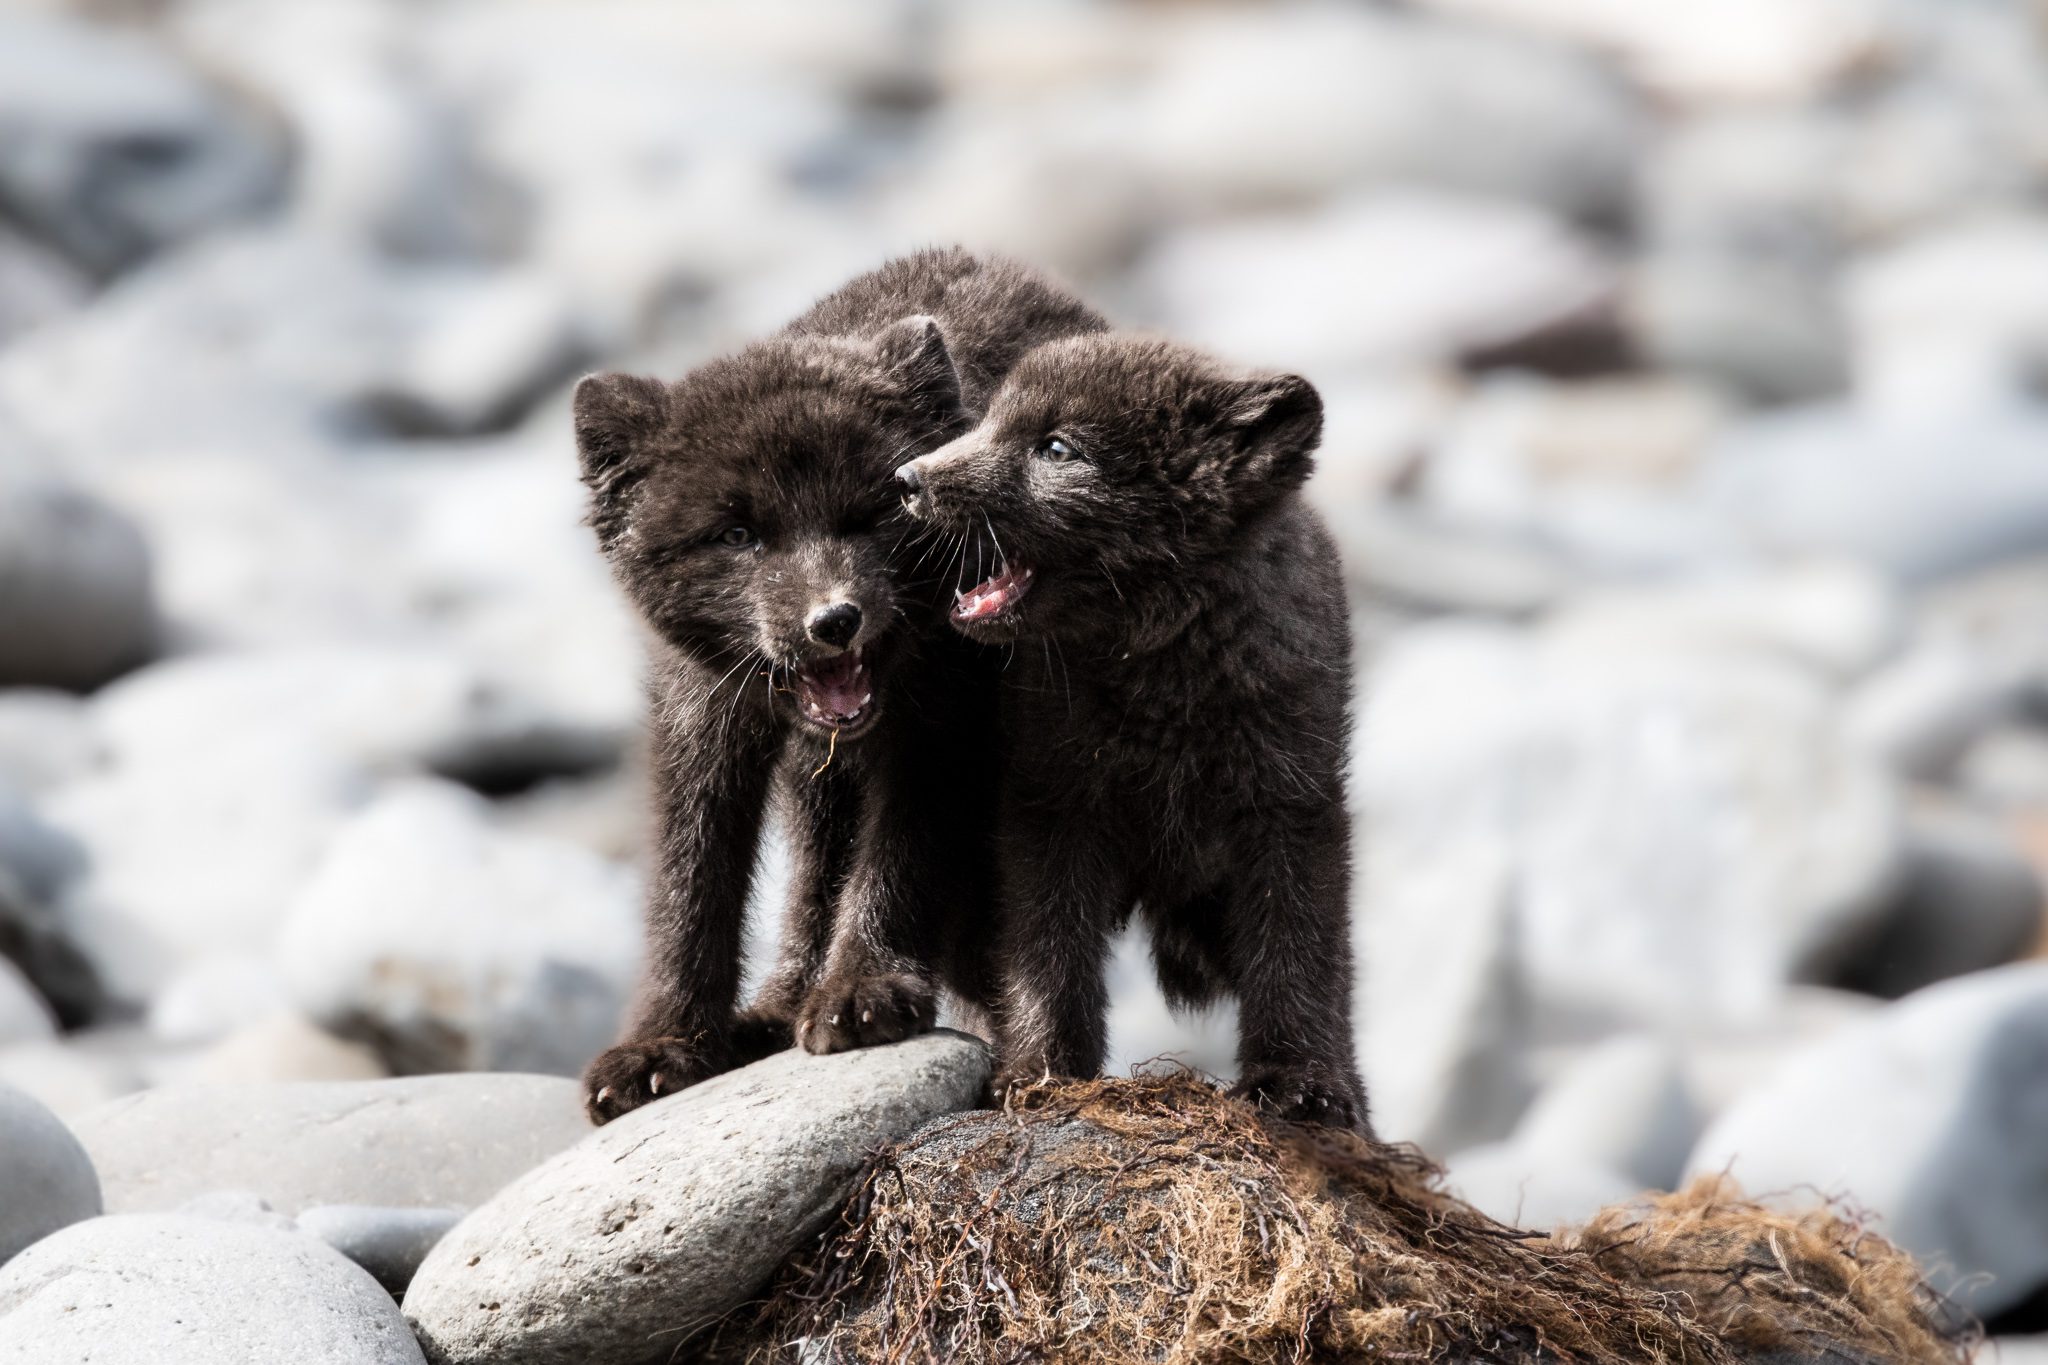 New on YouTube: Photographing Arctic Fox Cubs in Hornstrandir